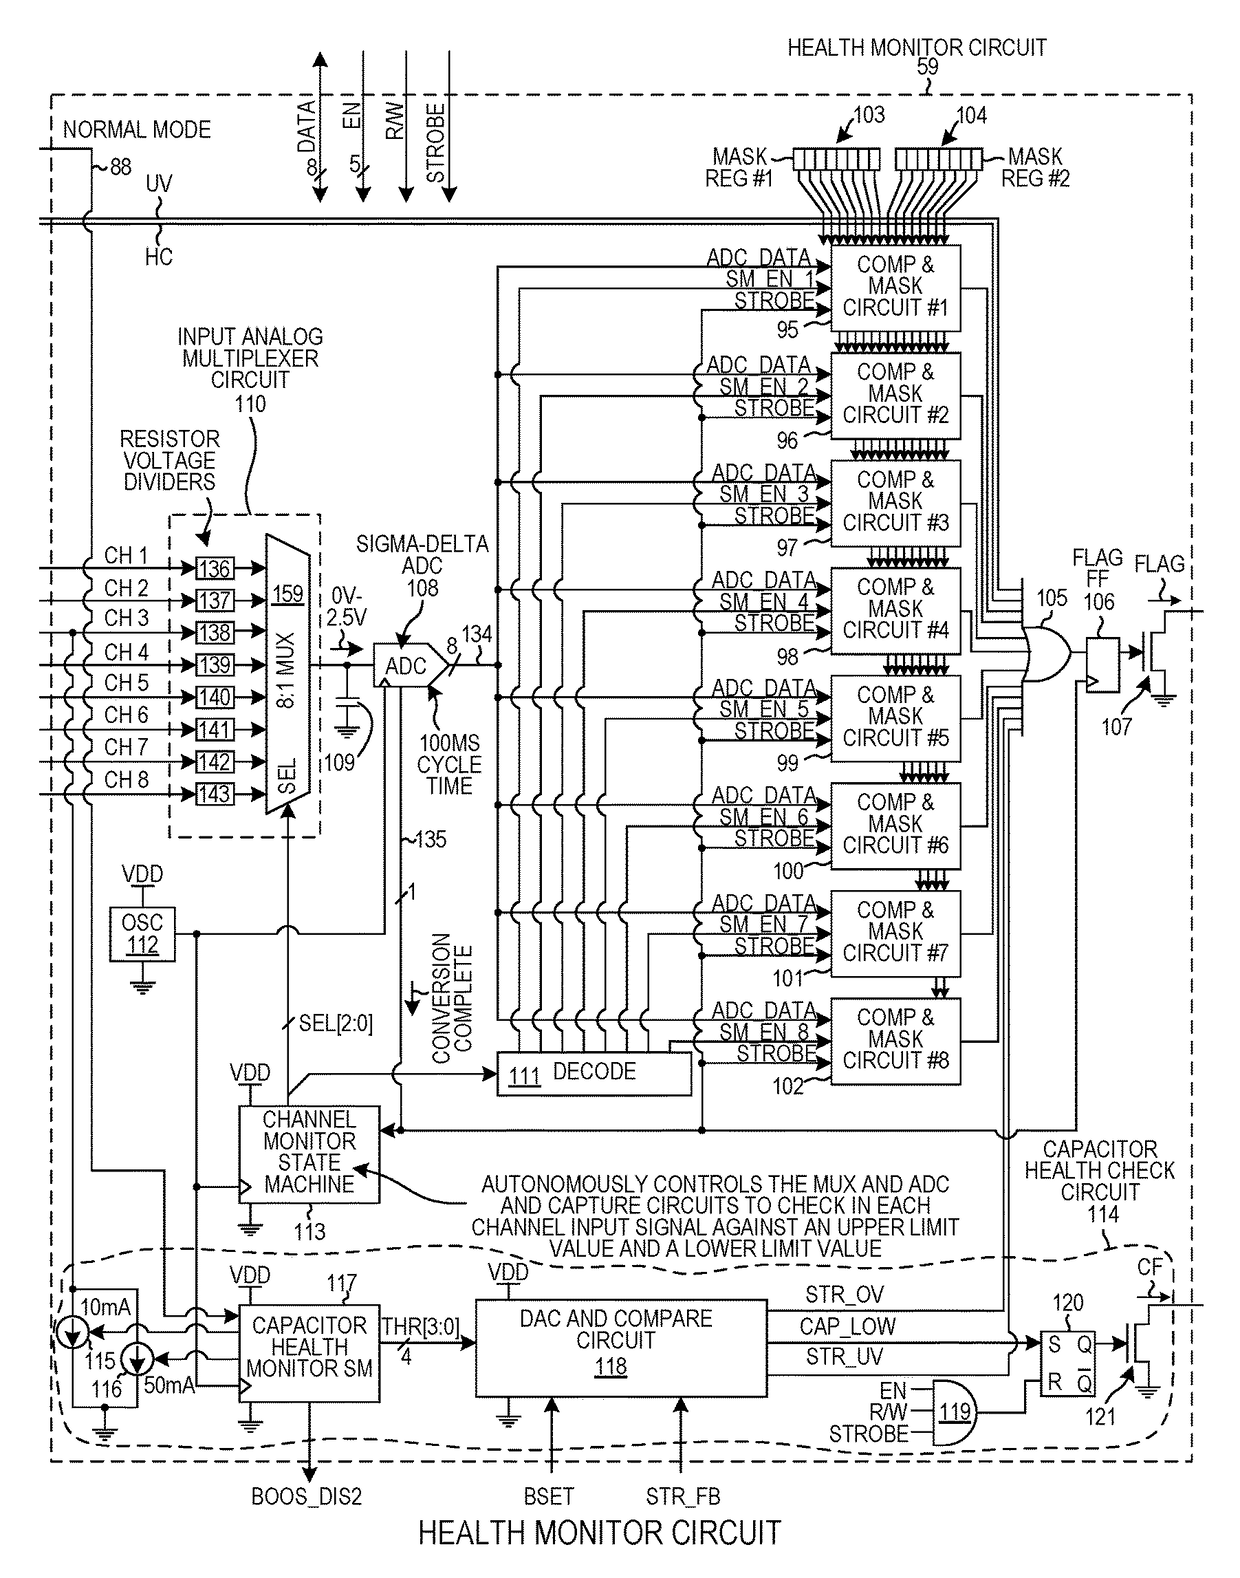 Power loss protection integrated circuit